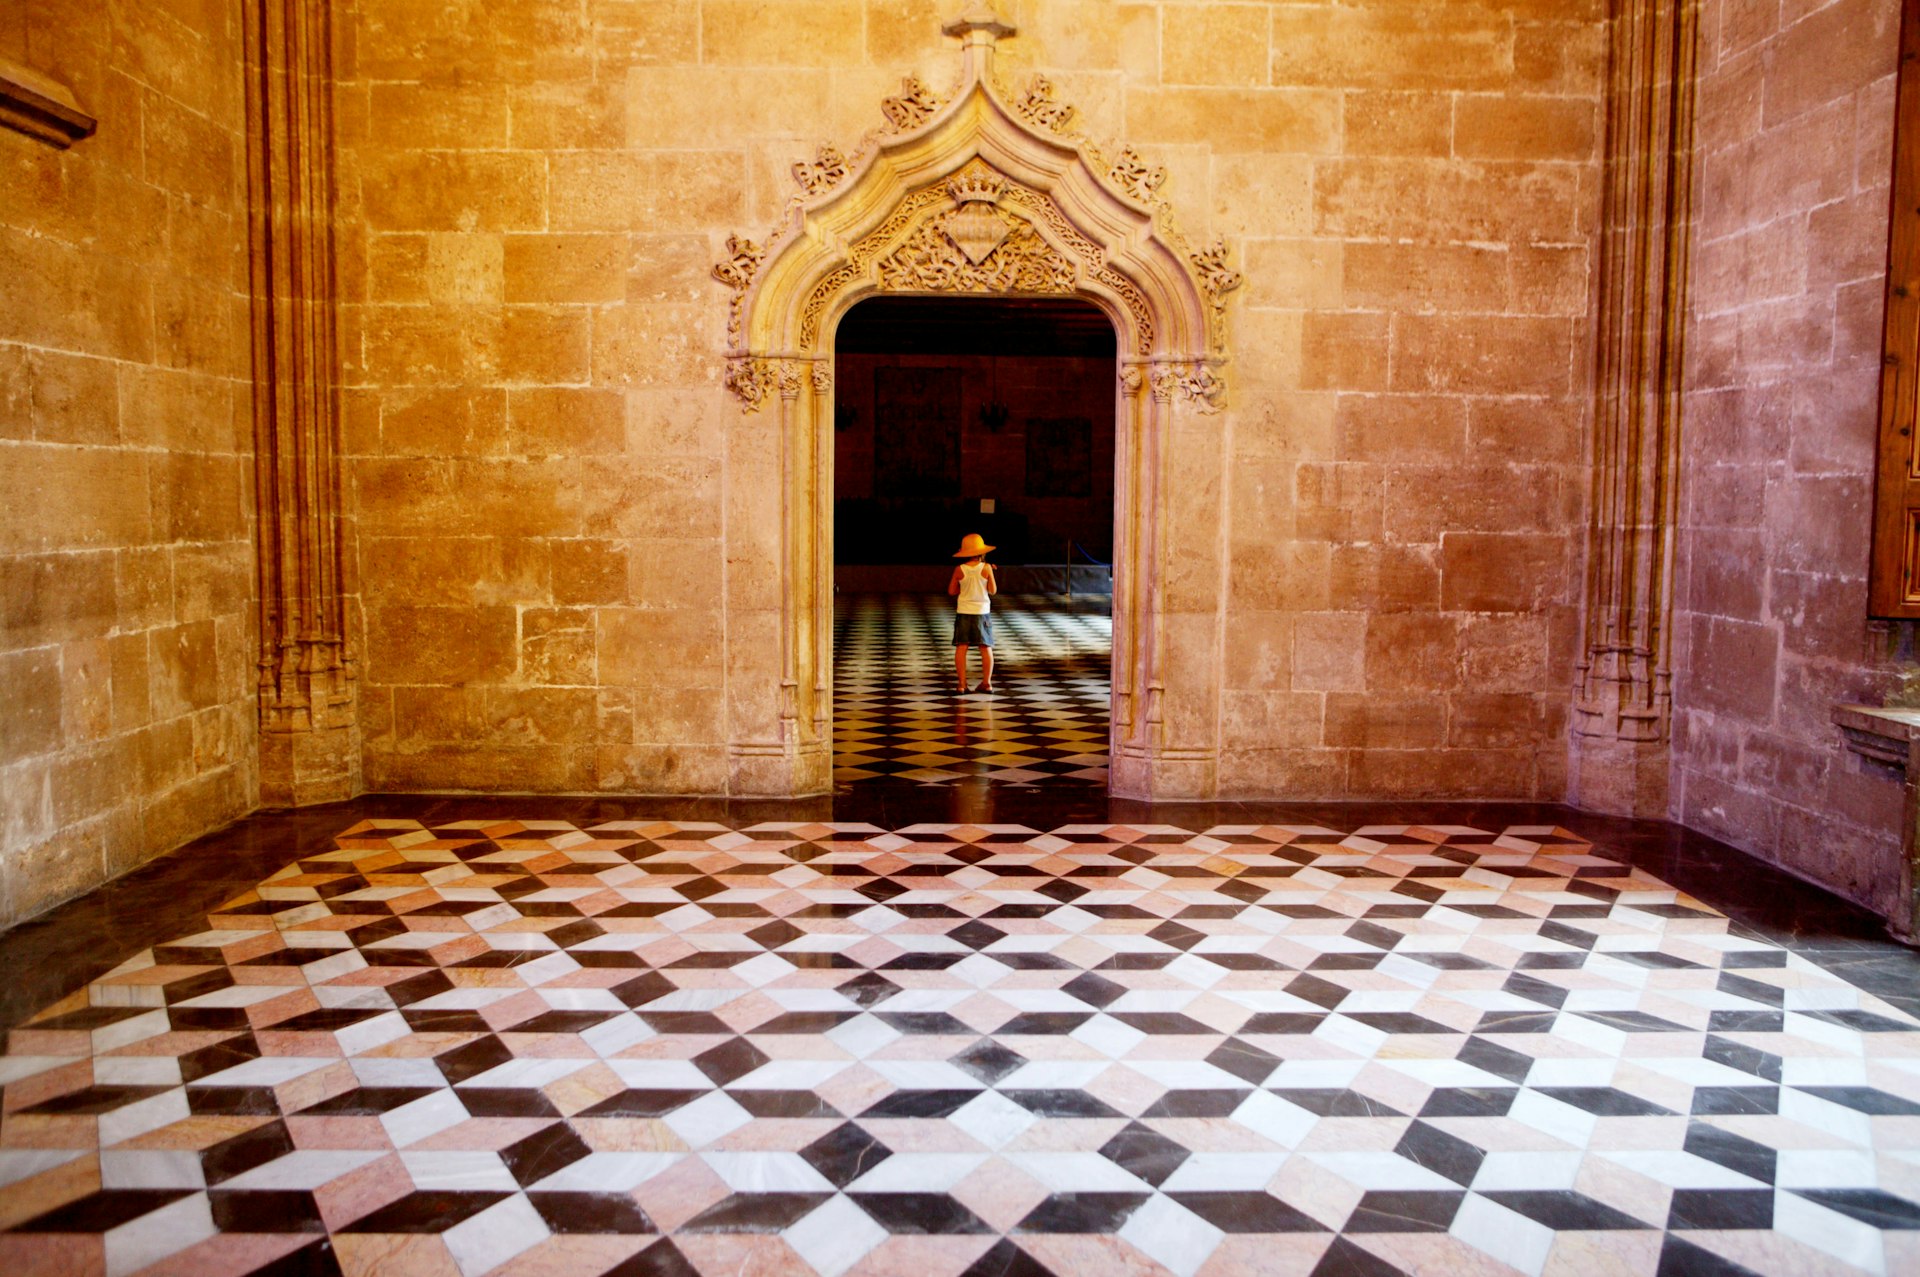 A small child stands in the doorway of a Gothic building with a black-and-white tiled floor